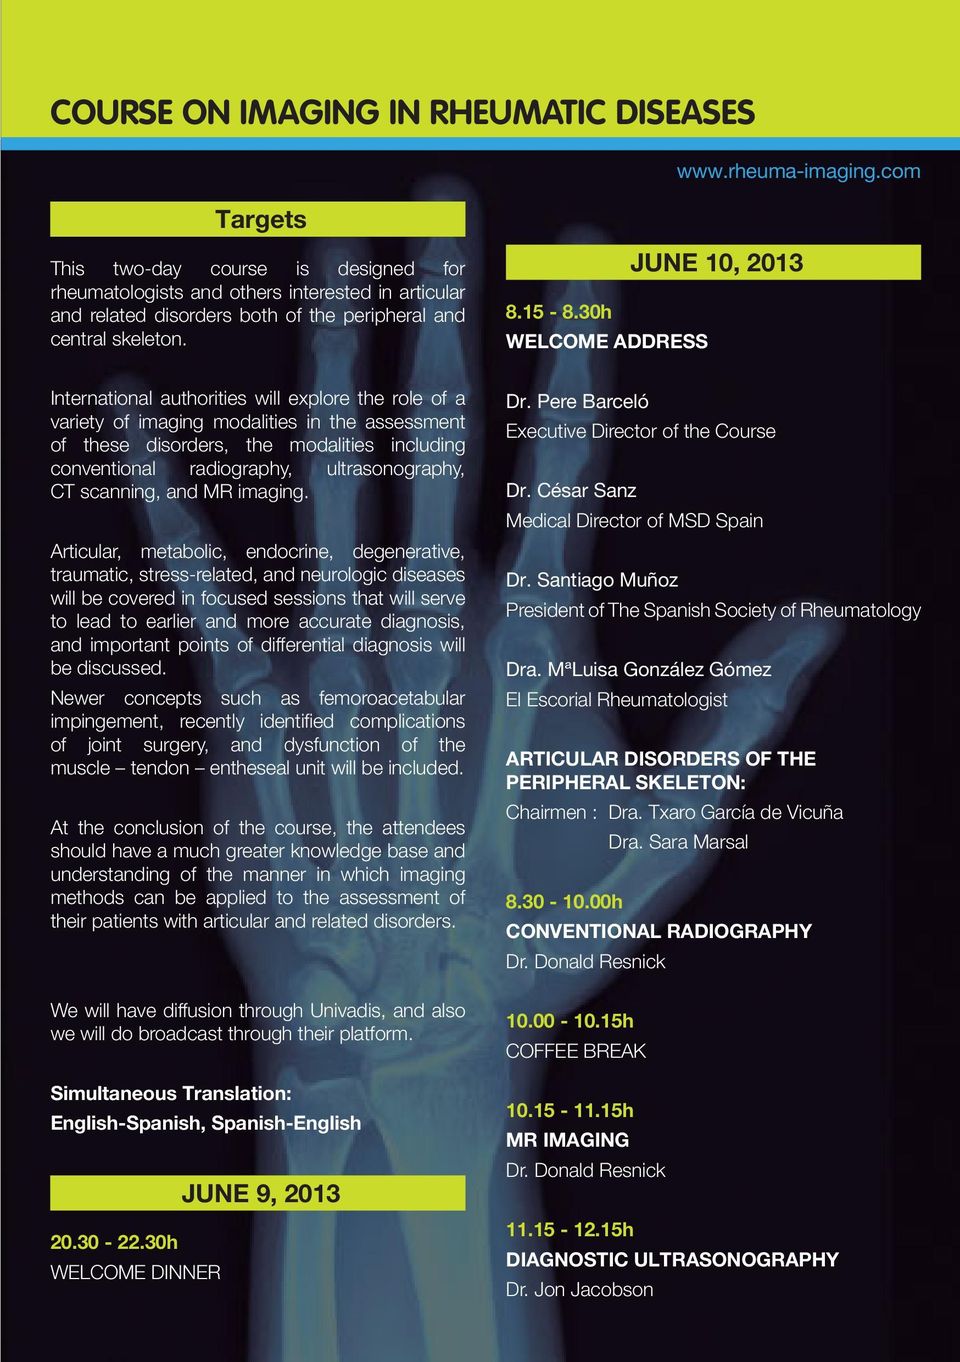 30h WELCOME ADDRESS JUNE 10, 2013 International authorities will explore the role of a variety of imaging modalities in the assessment of these disorders, the modalities including conventional